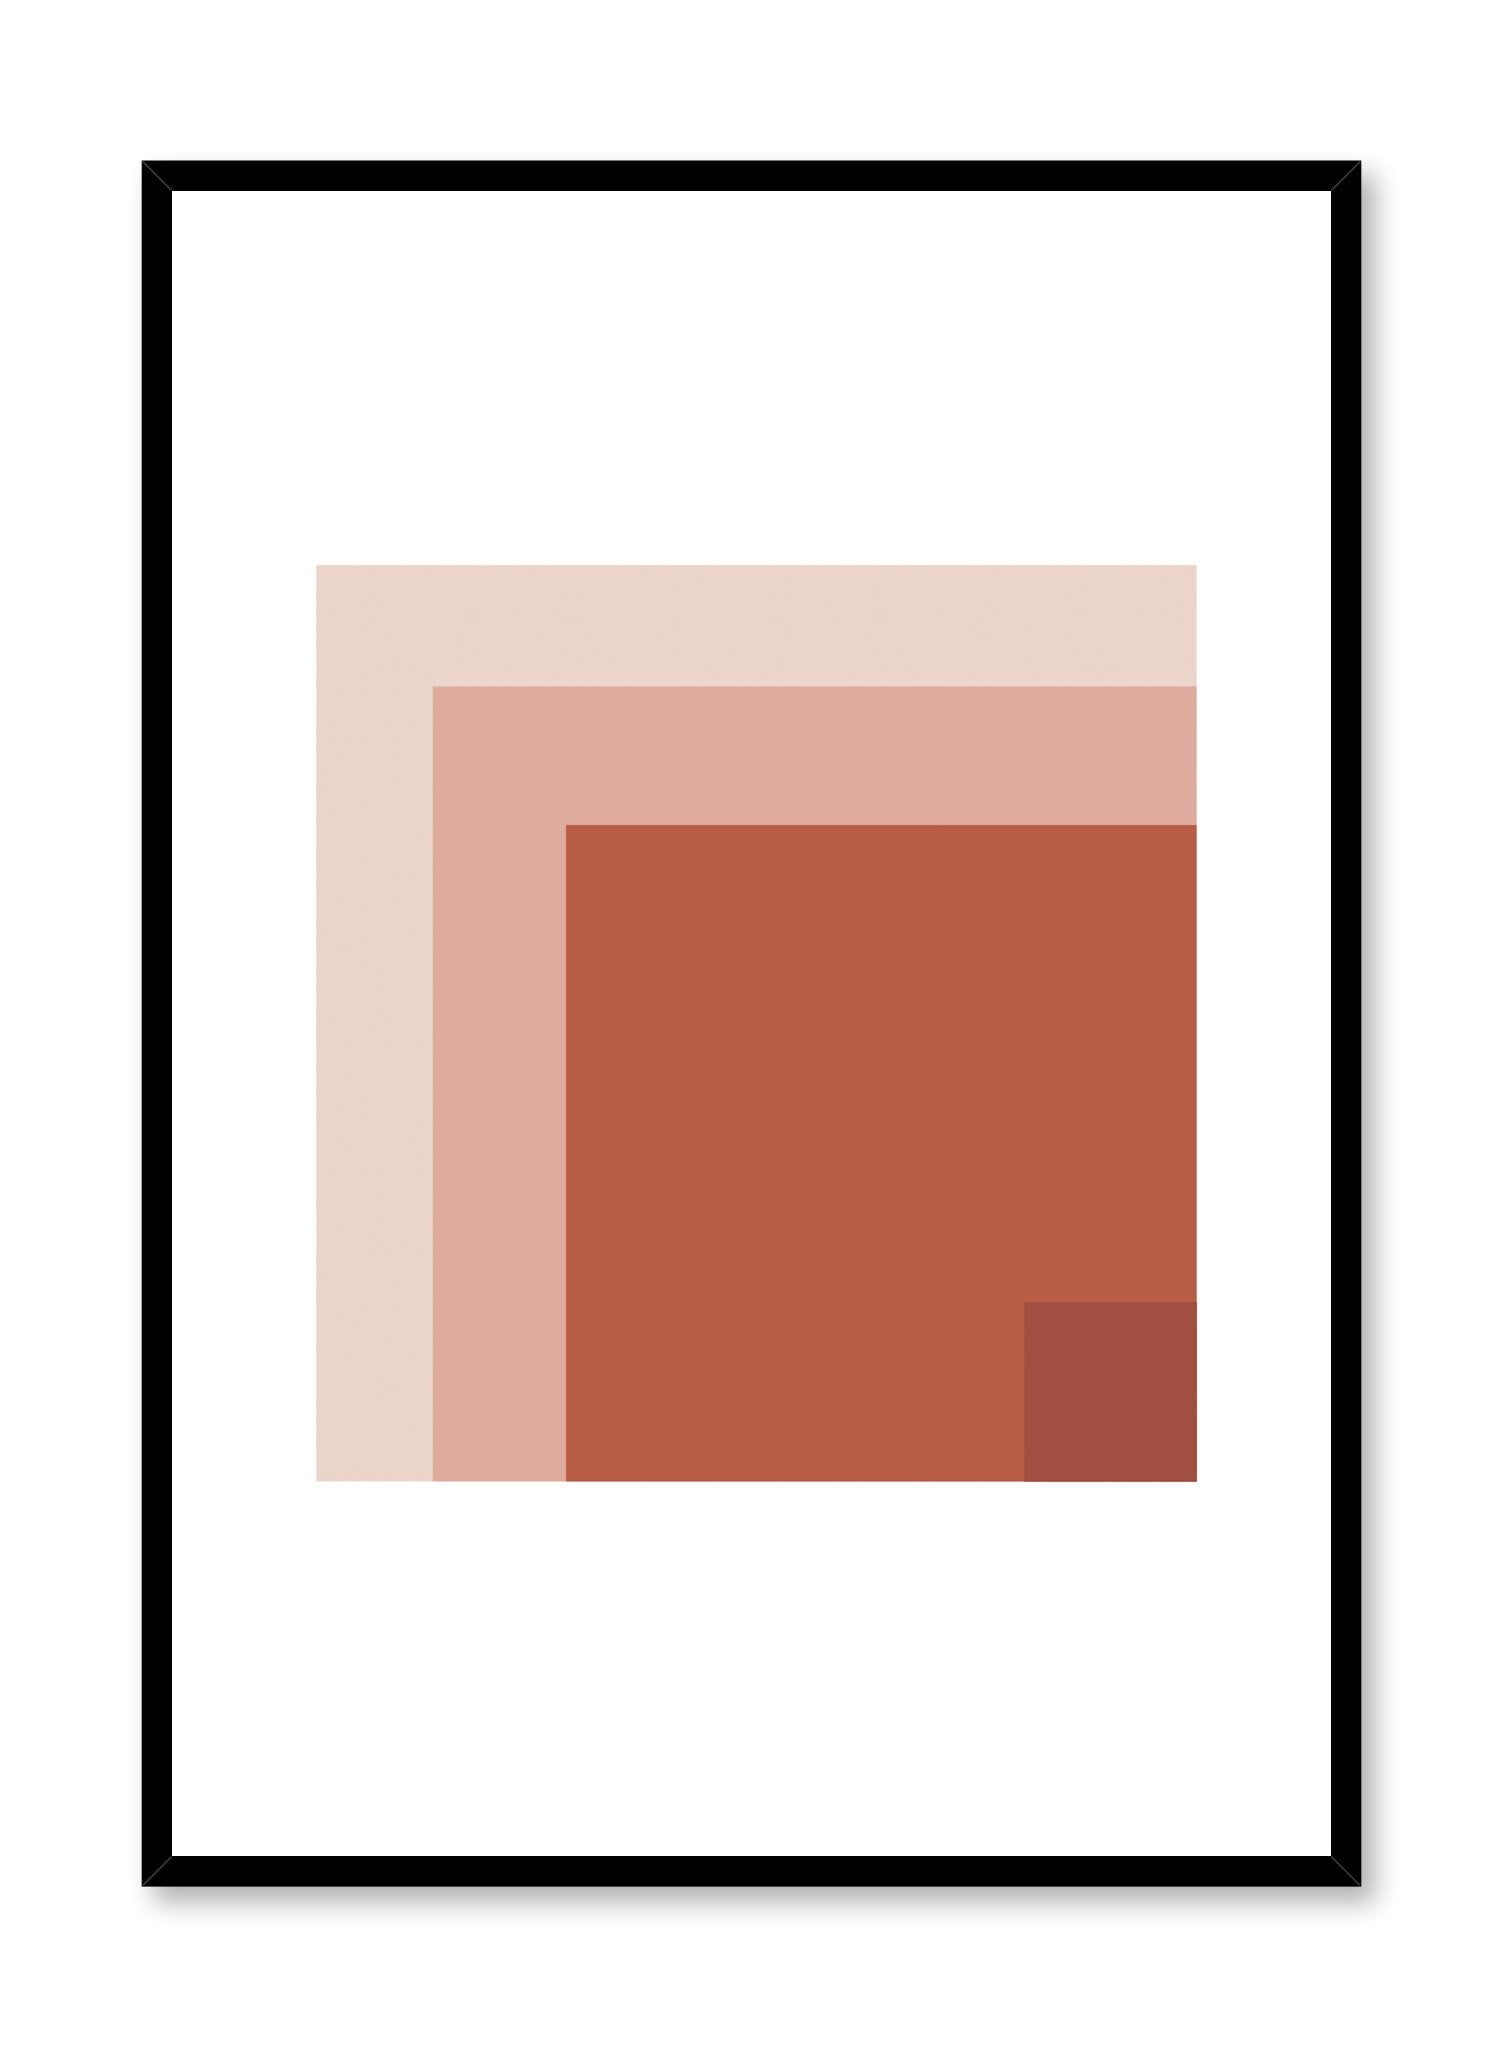 Modern minimalist poster by Opposite Wall with abstract squares inside squares